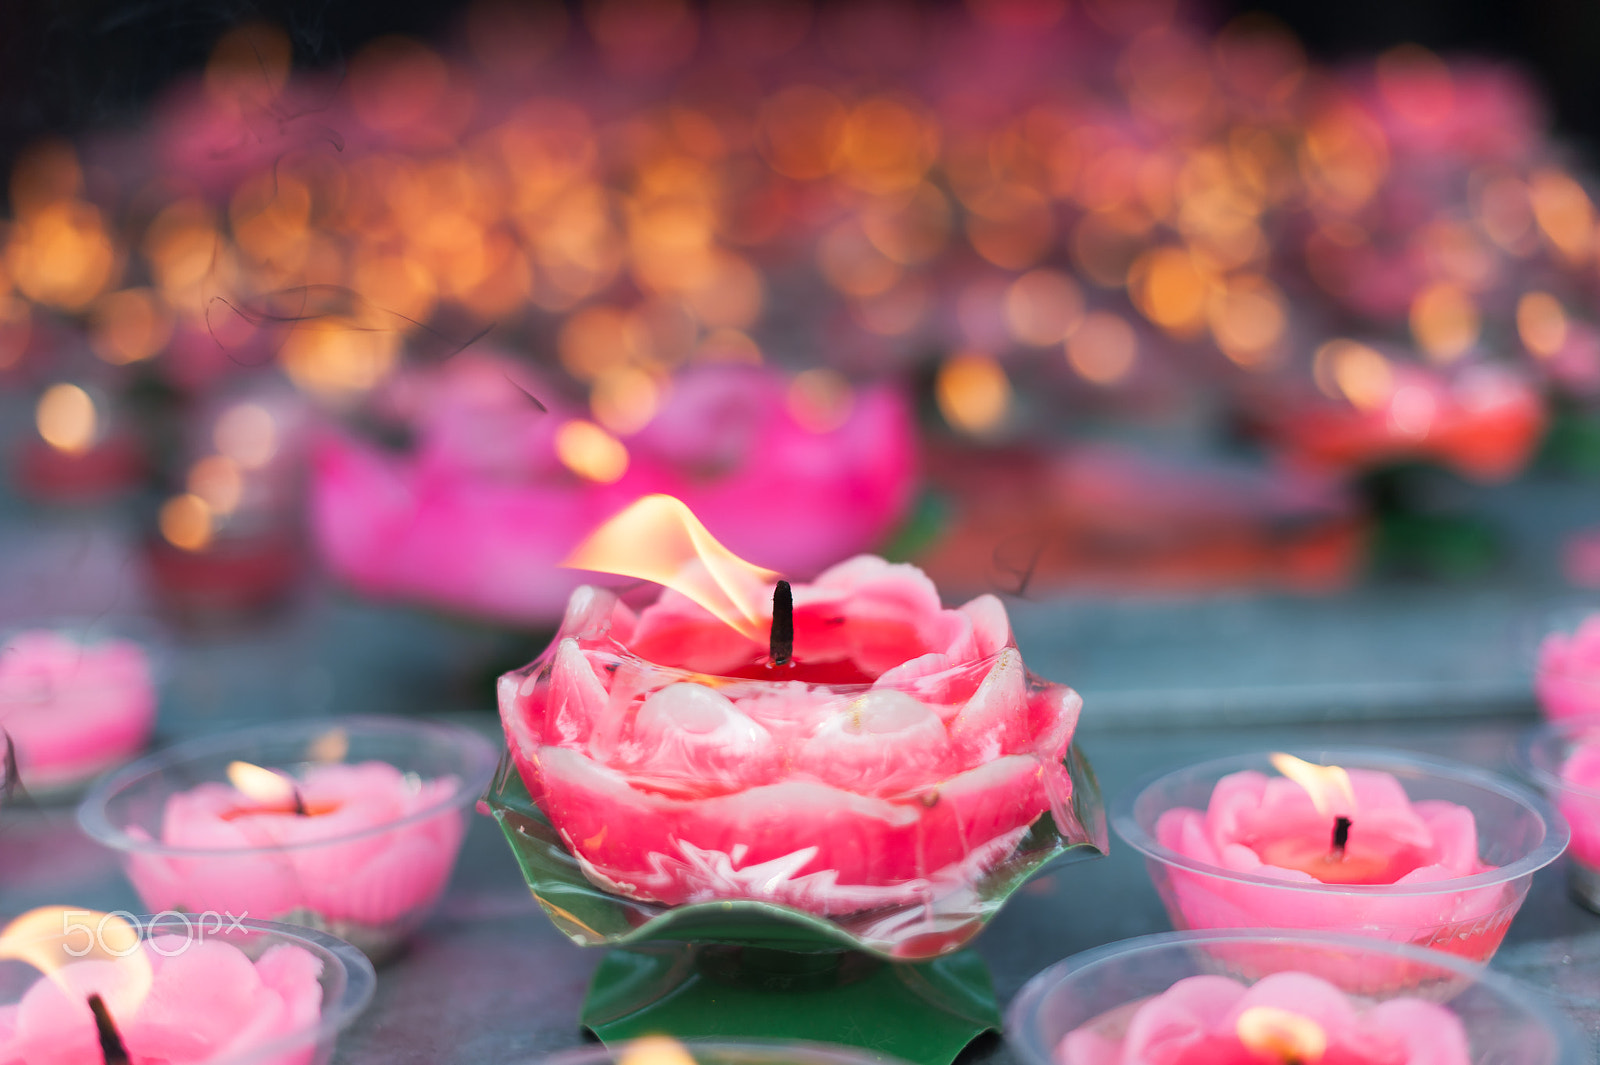 Nikon D700 sample photo. Lotus candles in a buddhist temple photography